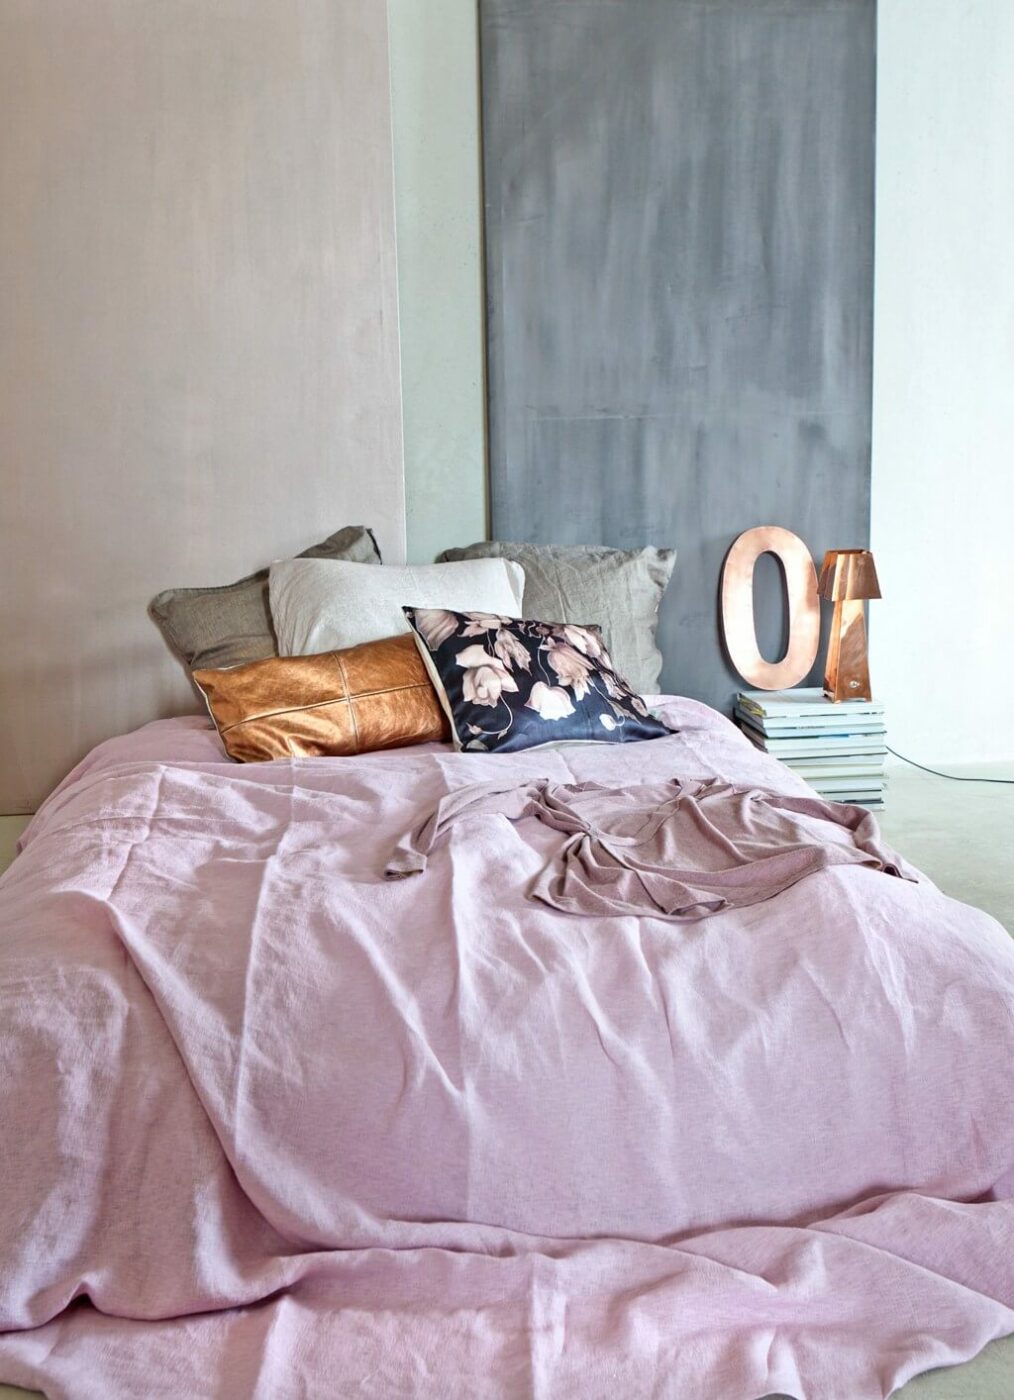 Slates Of Gray Rustic Bedroom With Blush Duvet